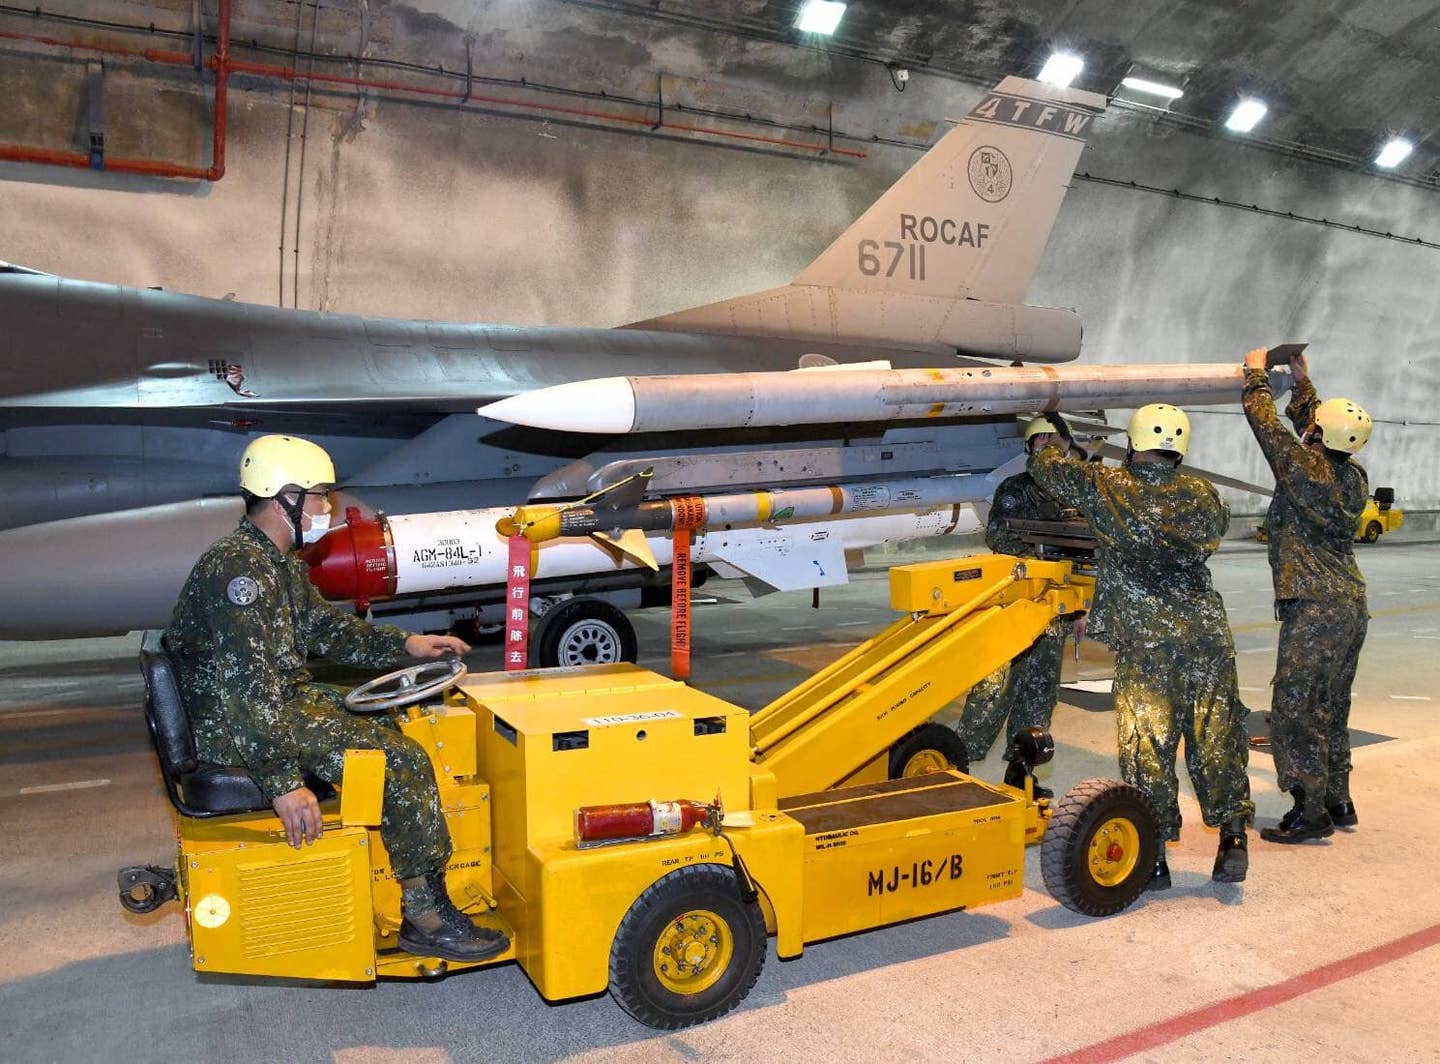 A photo of the ROCAF's weapons loading exercise where "AGM-84L" can be clearly seen on a Harpoon anti-ship munition. <em>Credit: ROCAF</em>